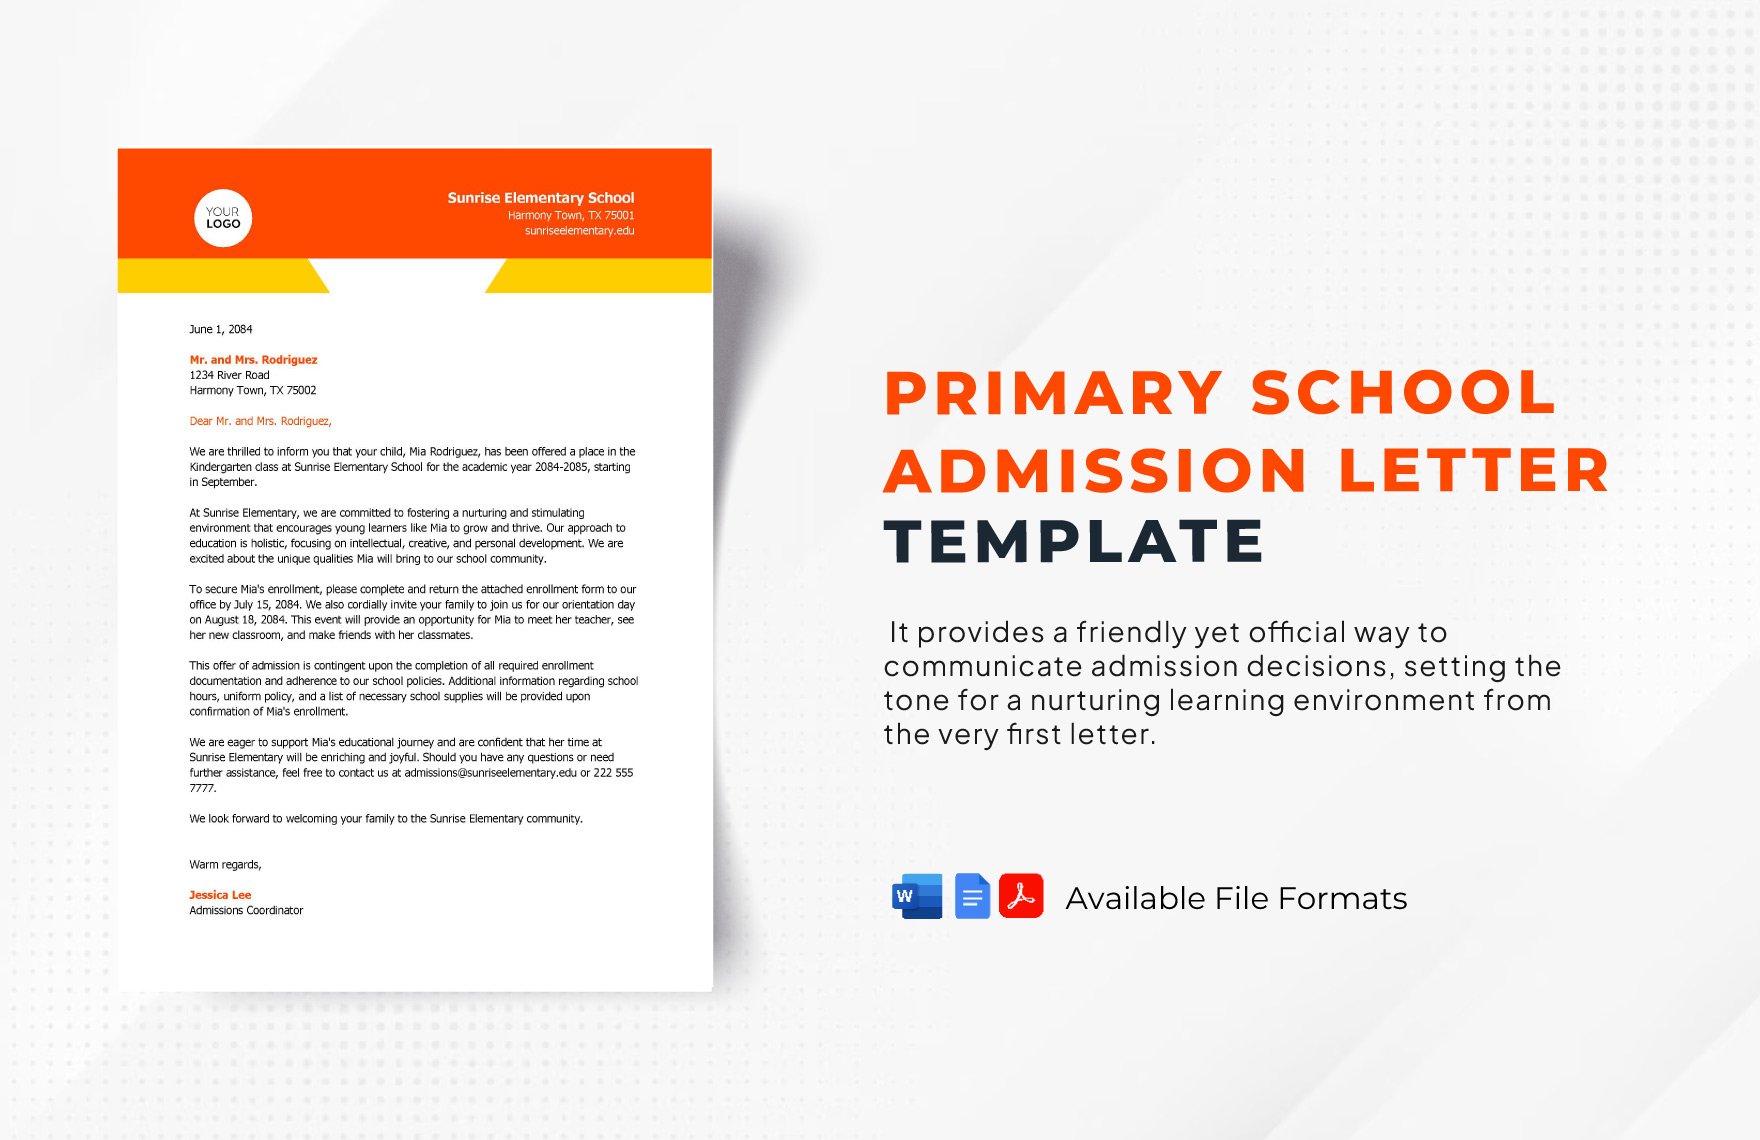 Primary School Admission Letter Template